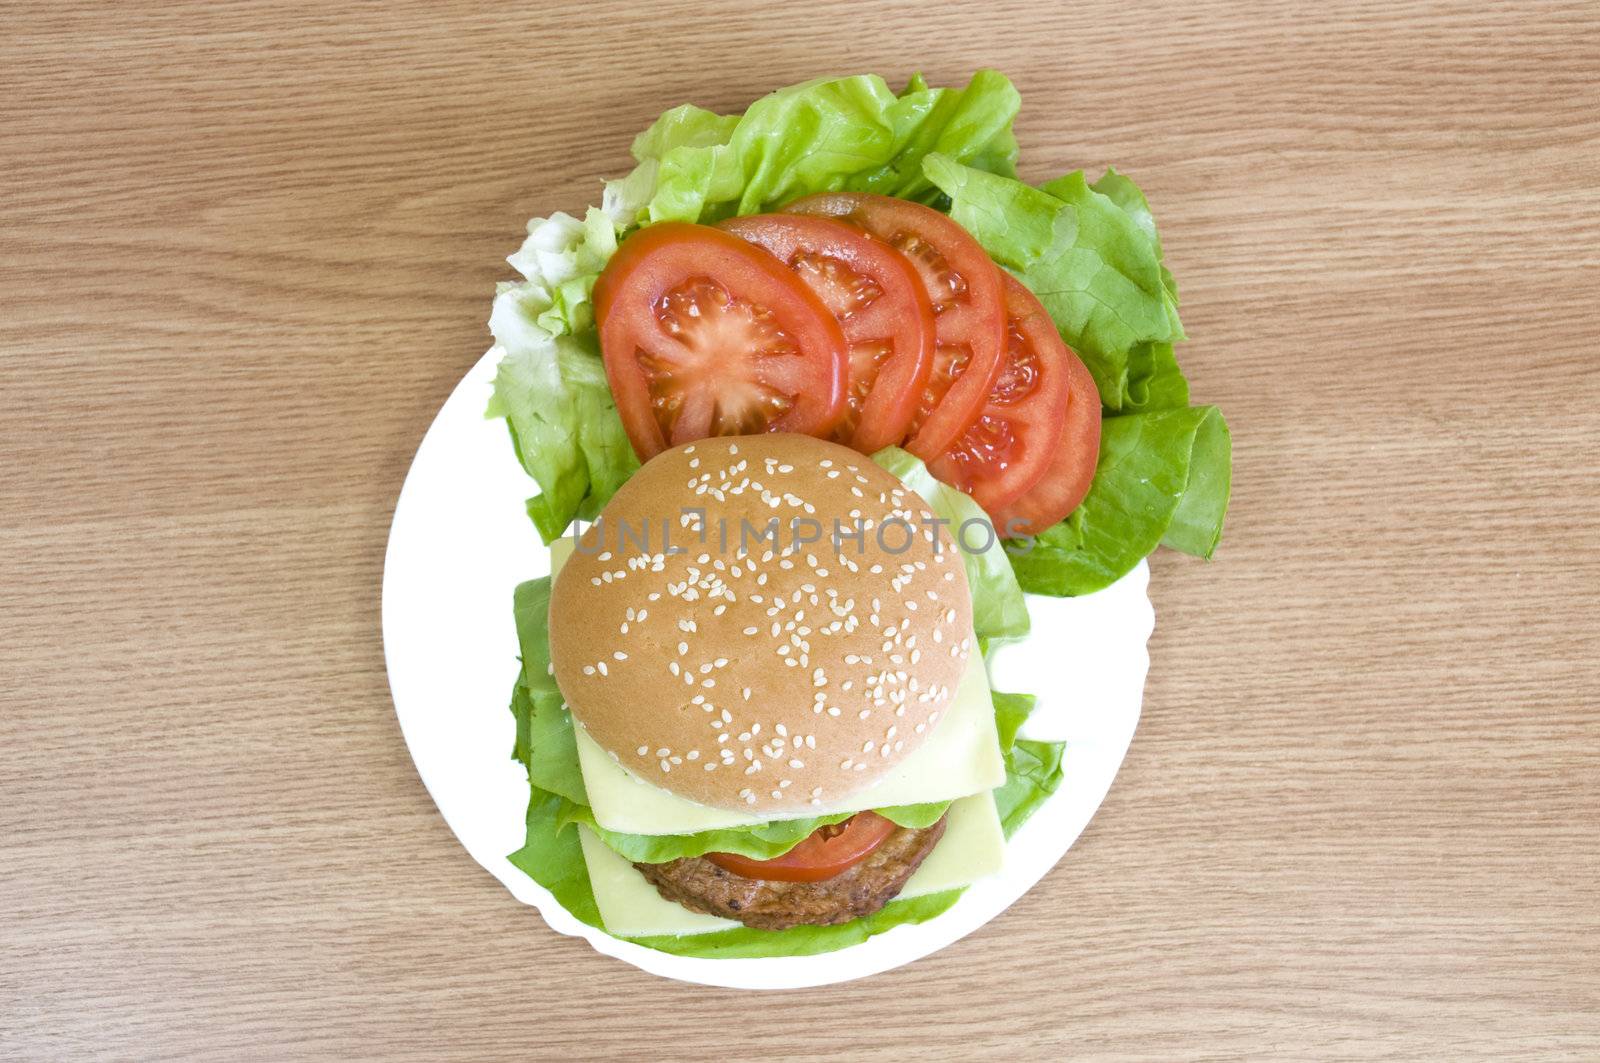 delicious beaf burger with cheese, lettuce, tomato and mayo